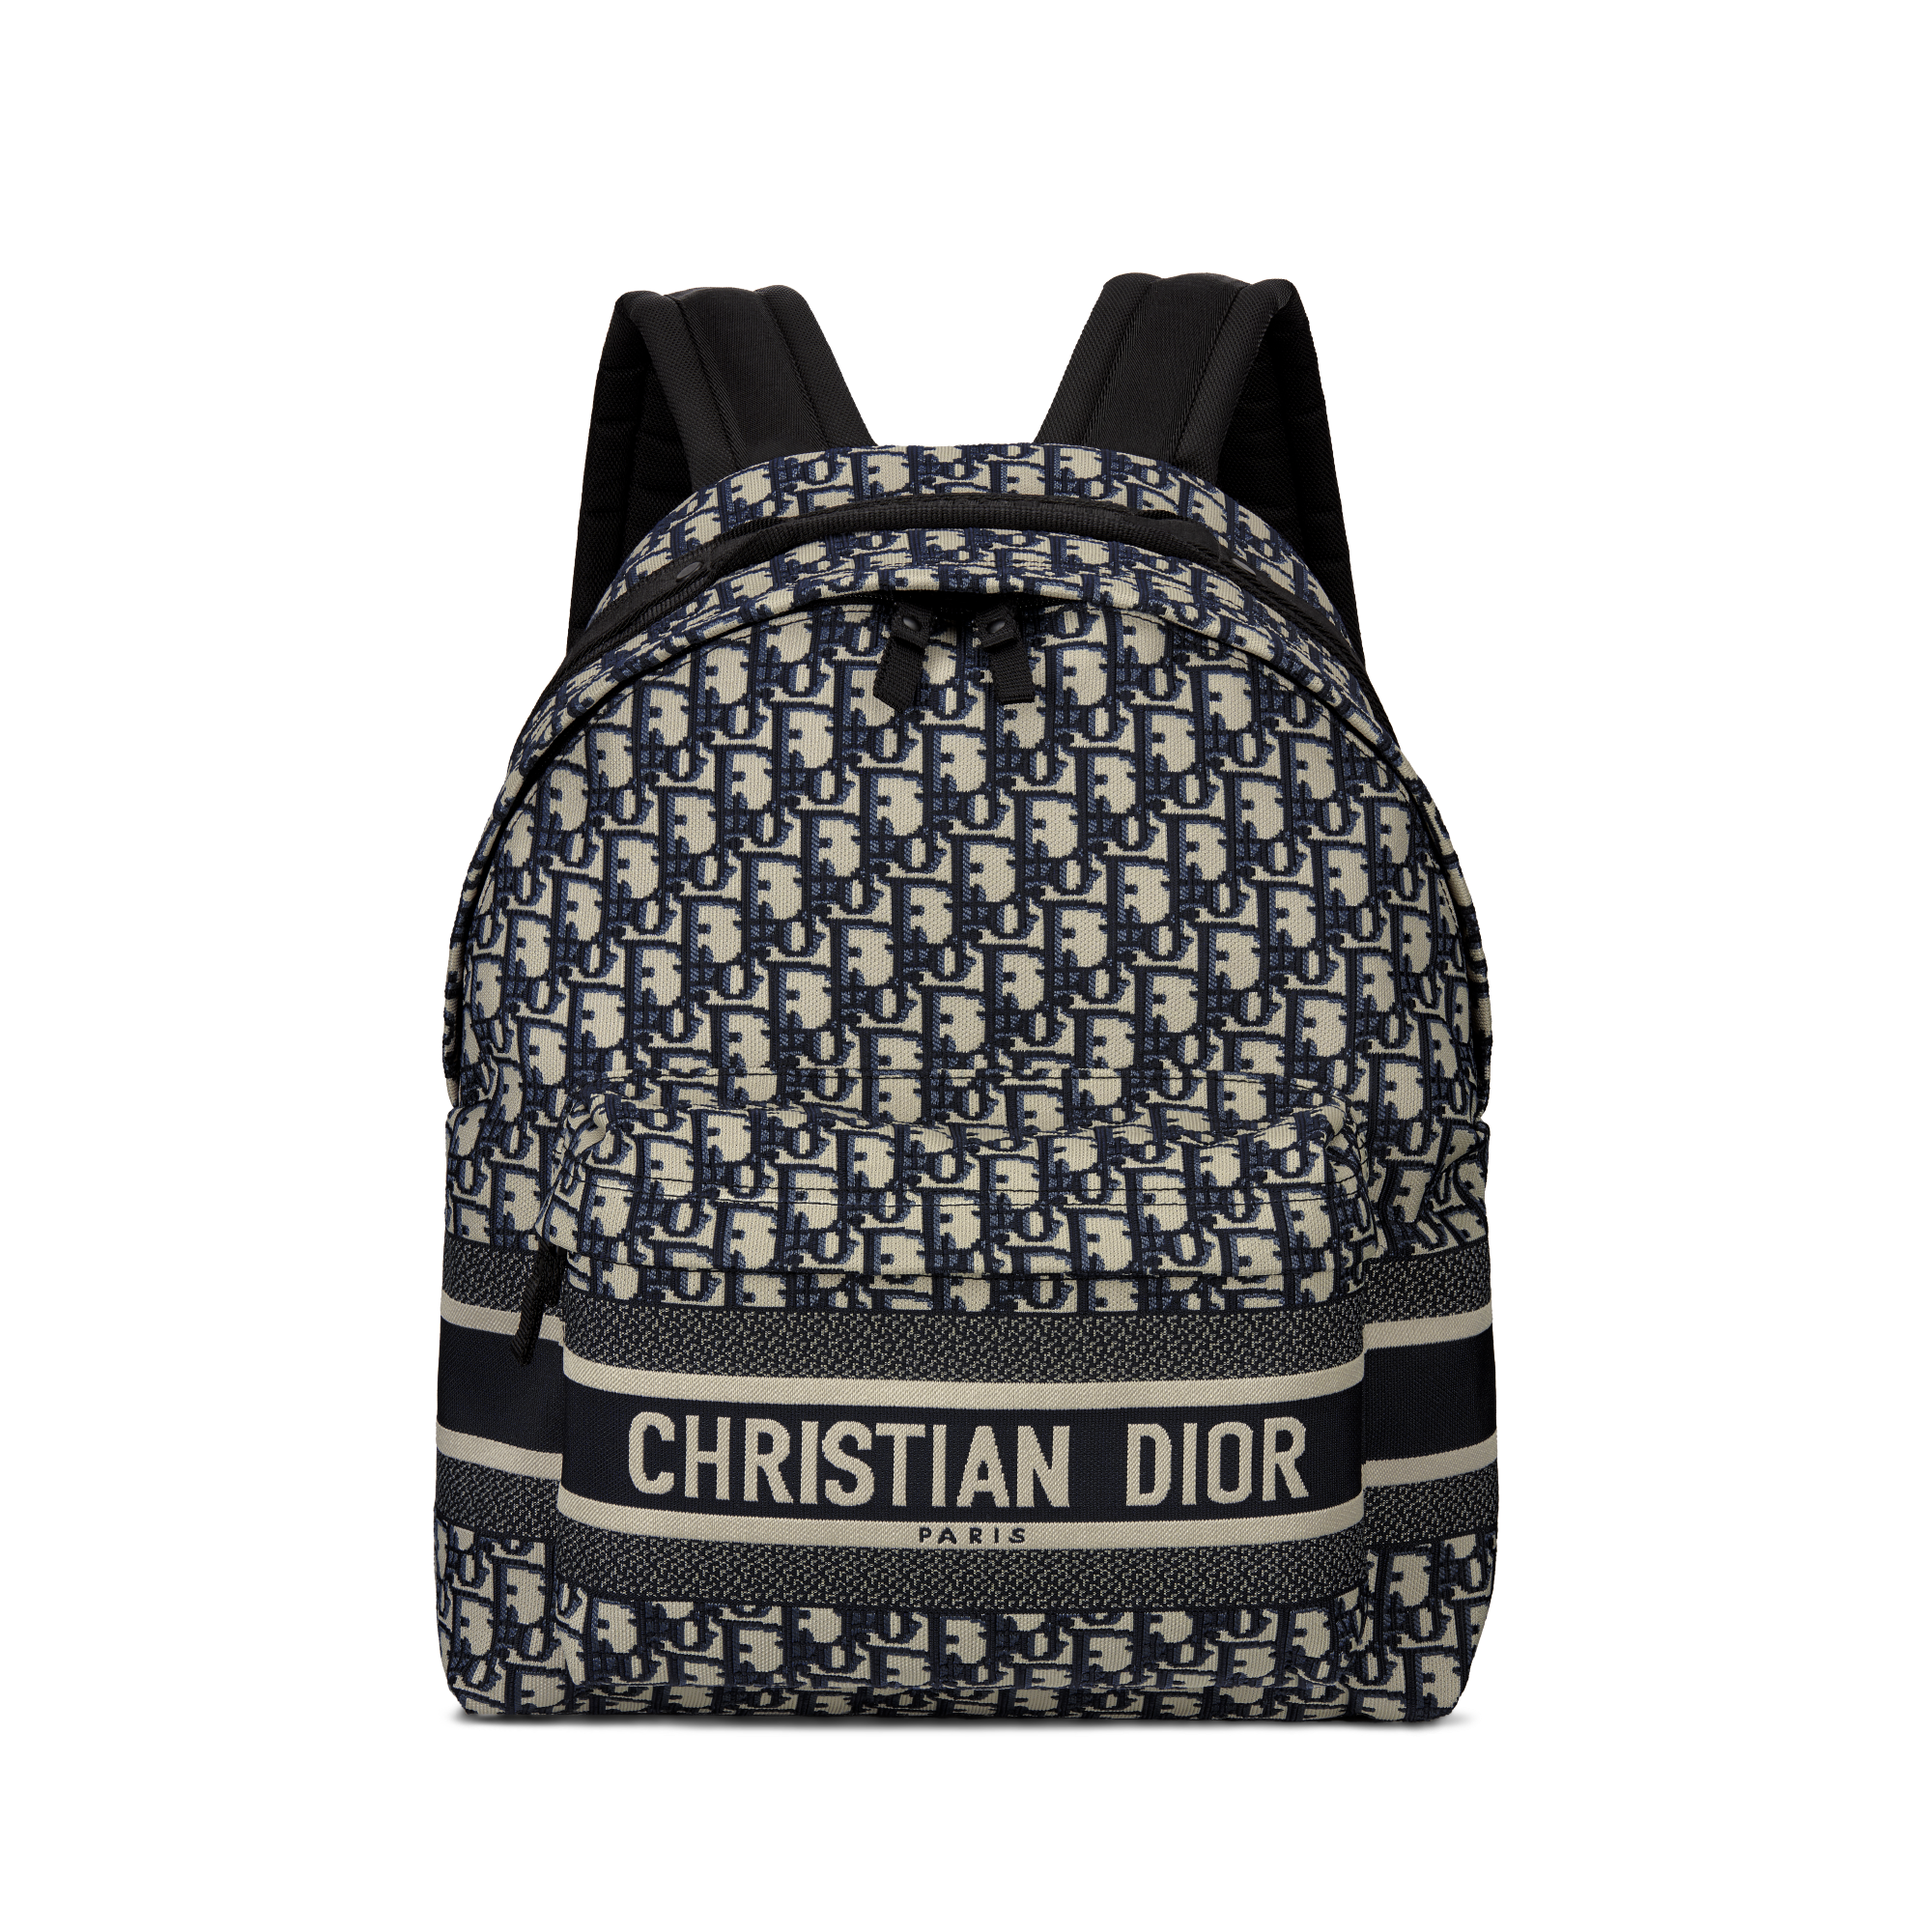 This Is Original Christian Dior Traveling Trolley Bags in East